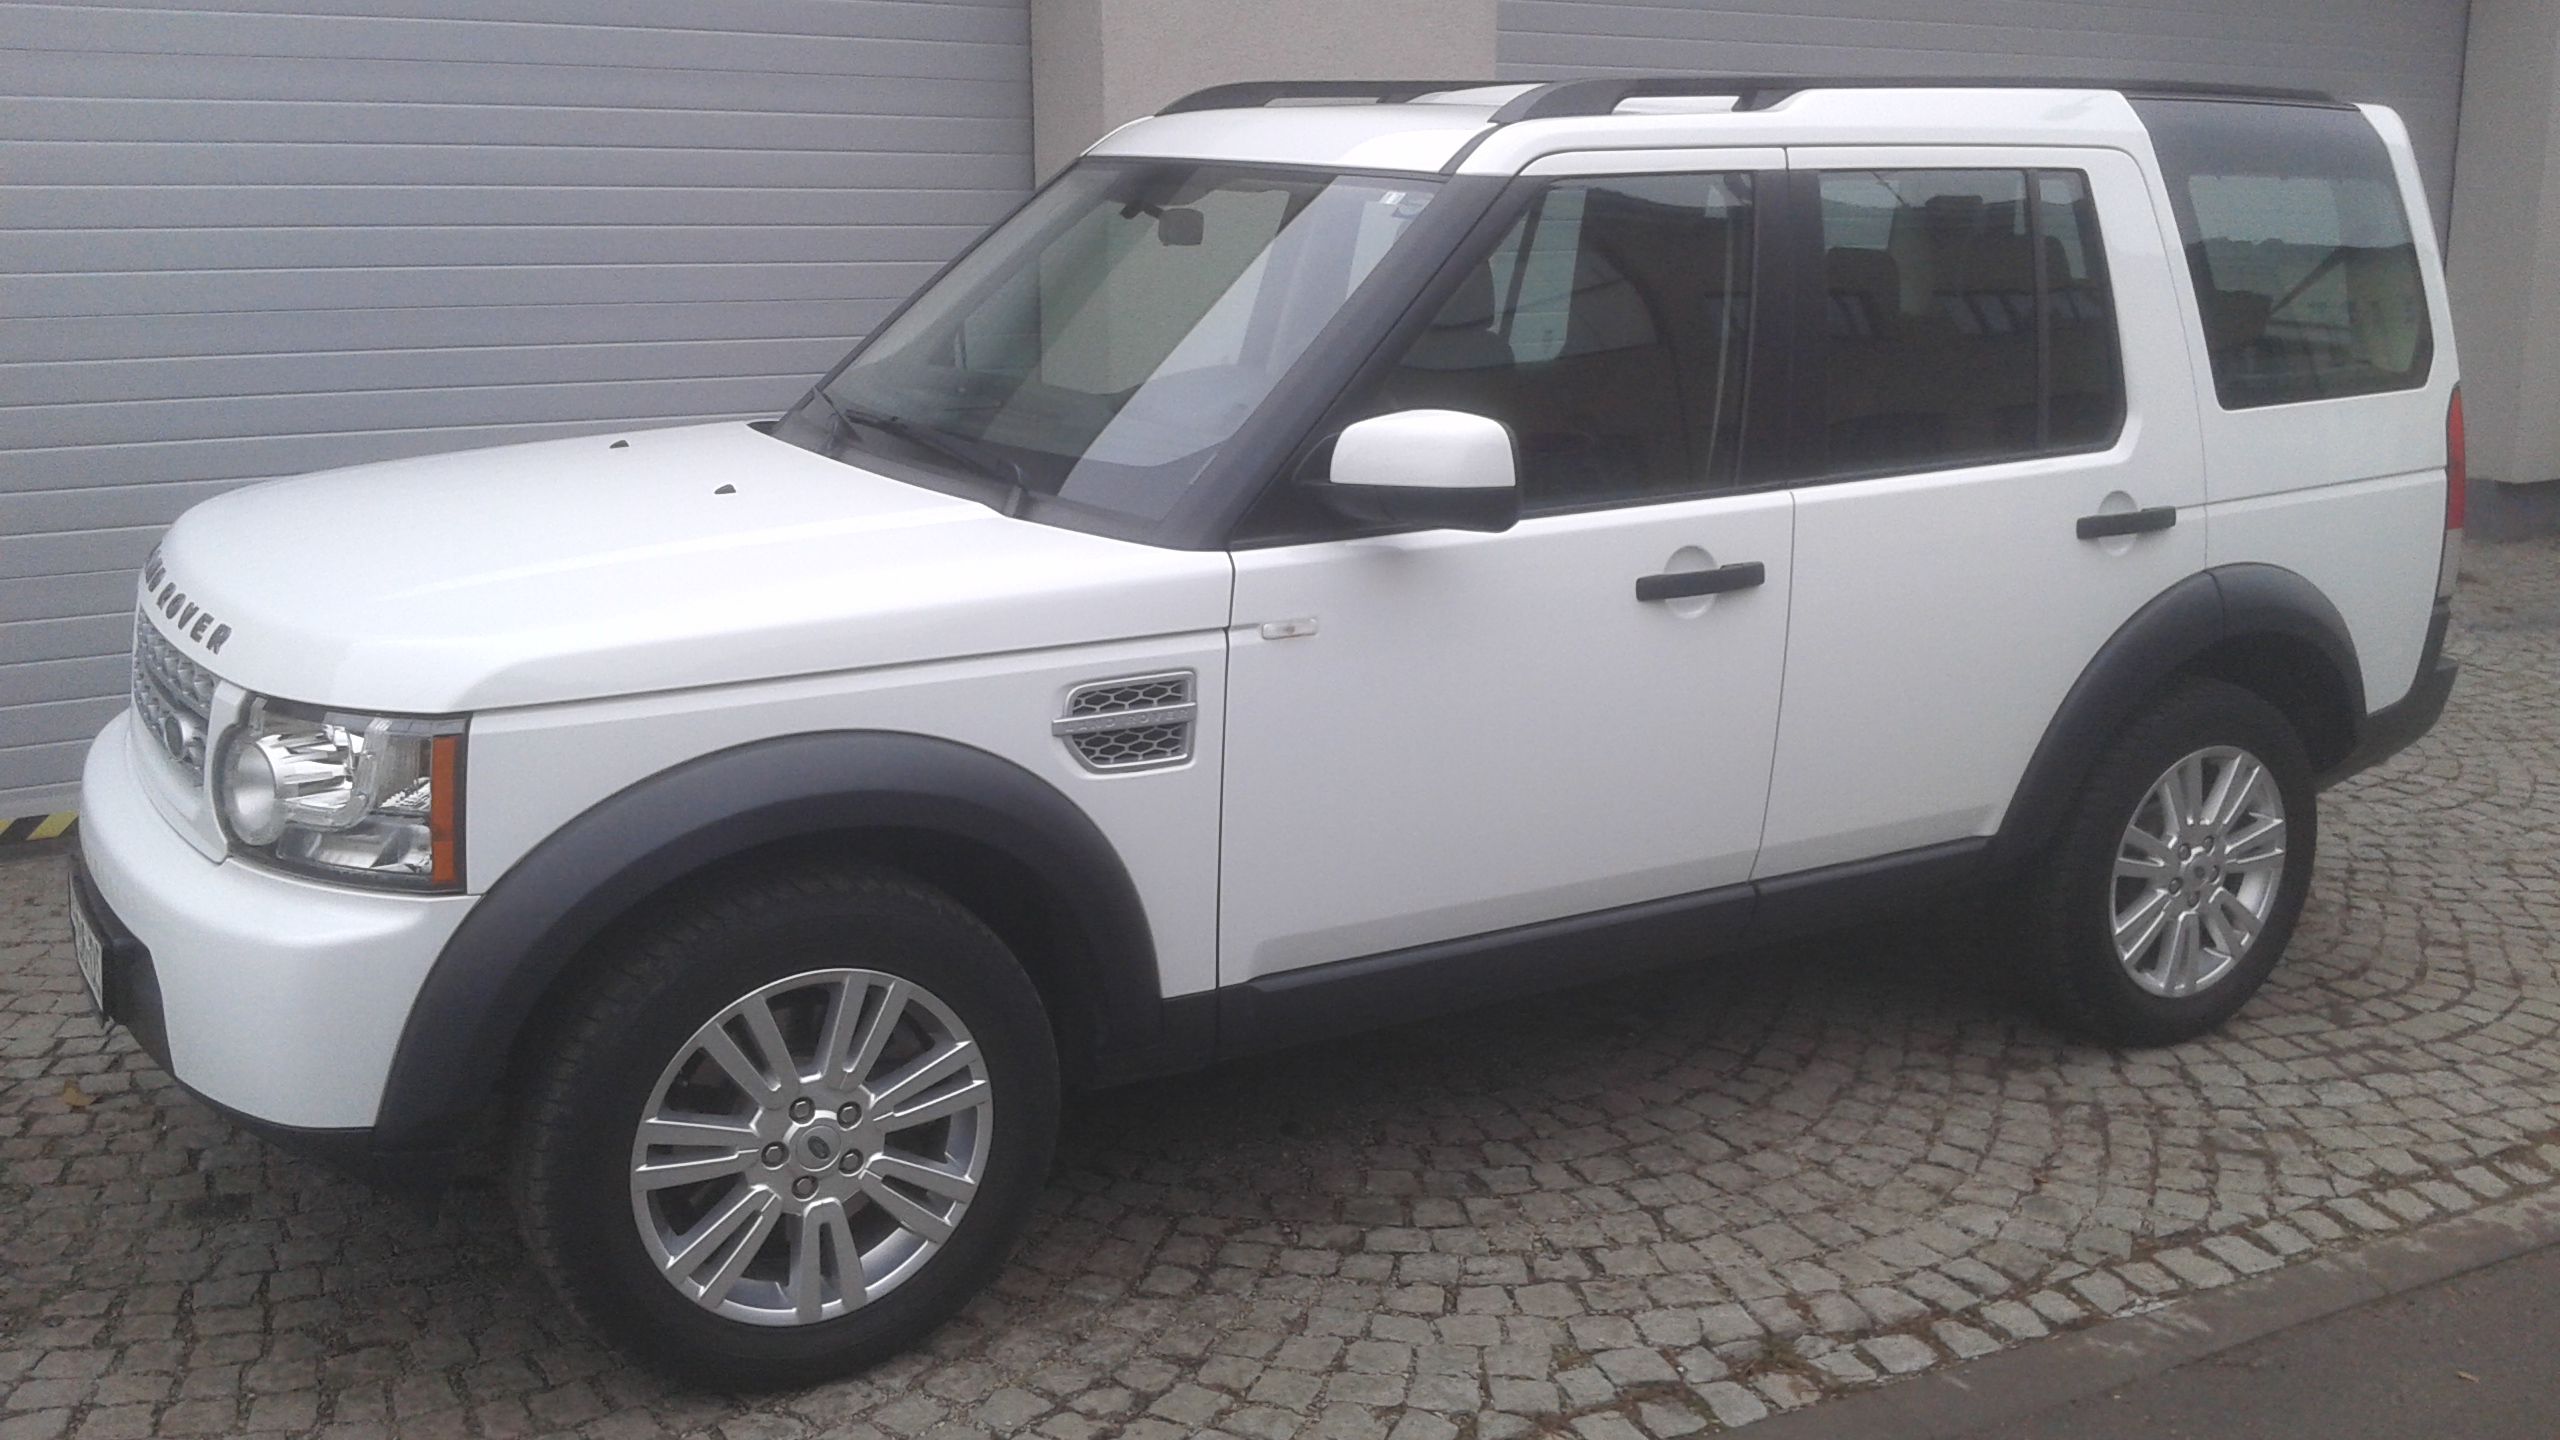 Land Rover Discovery 4 TDV6 S - ImportCar.cz